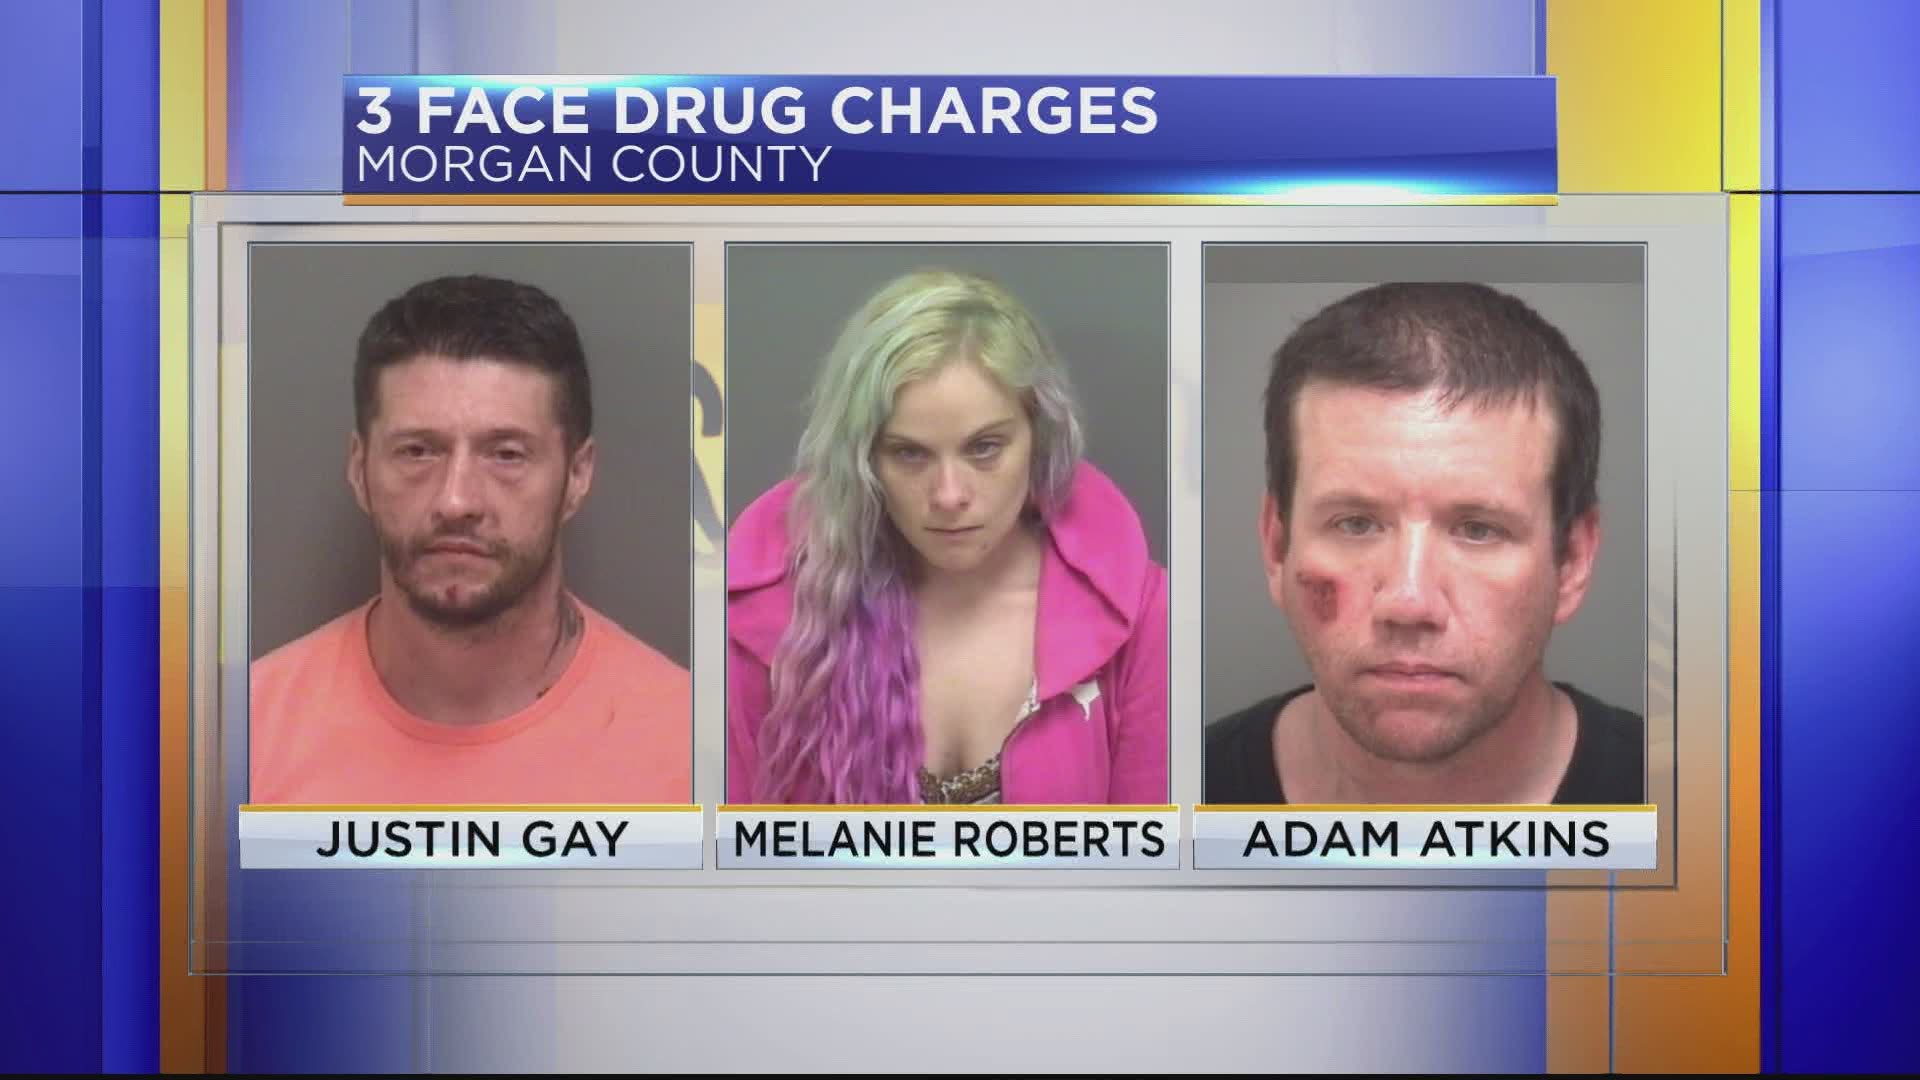 All three suspects face multiple drug charges and were taken to the Morgan County Jail.